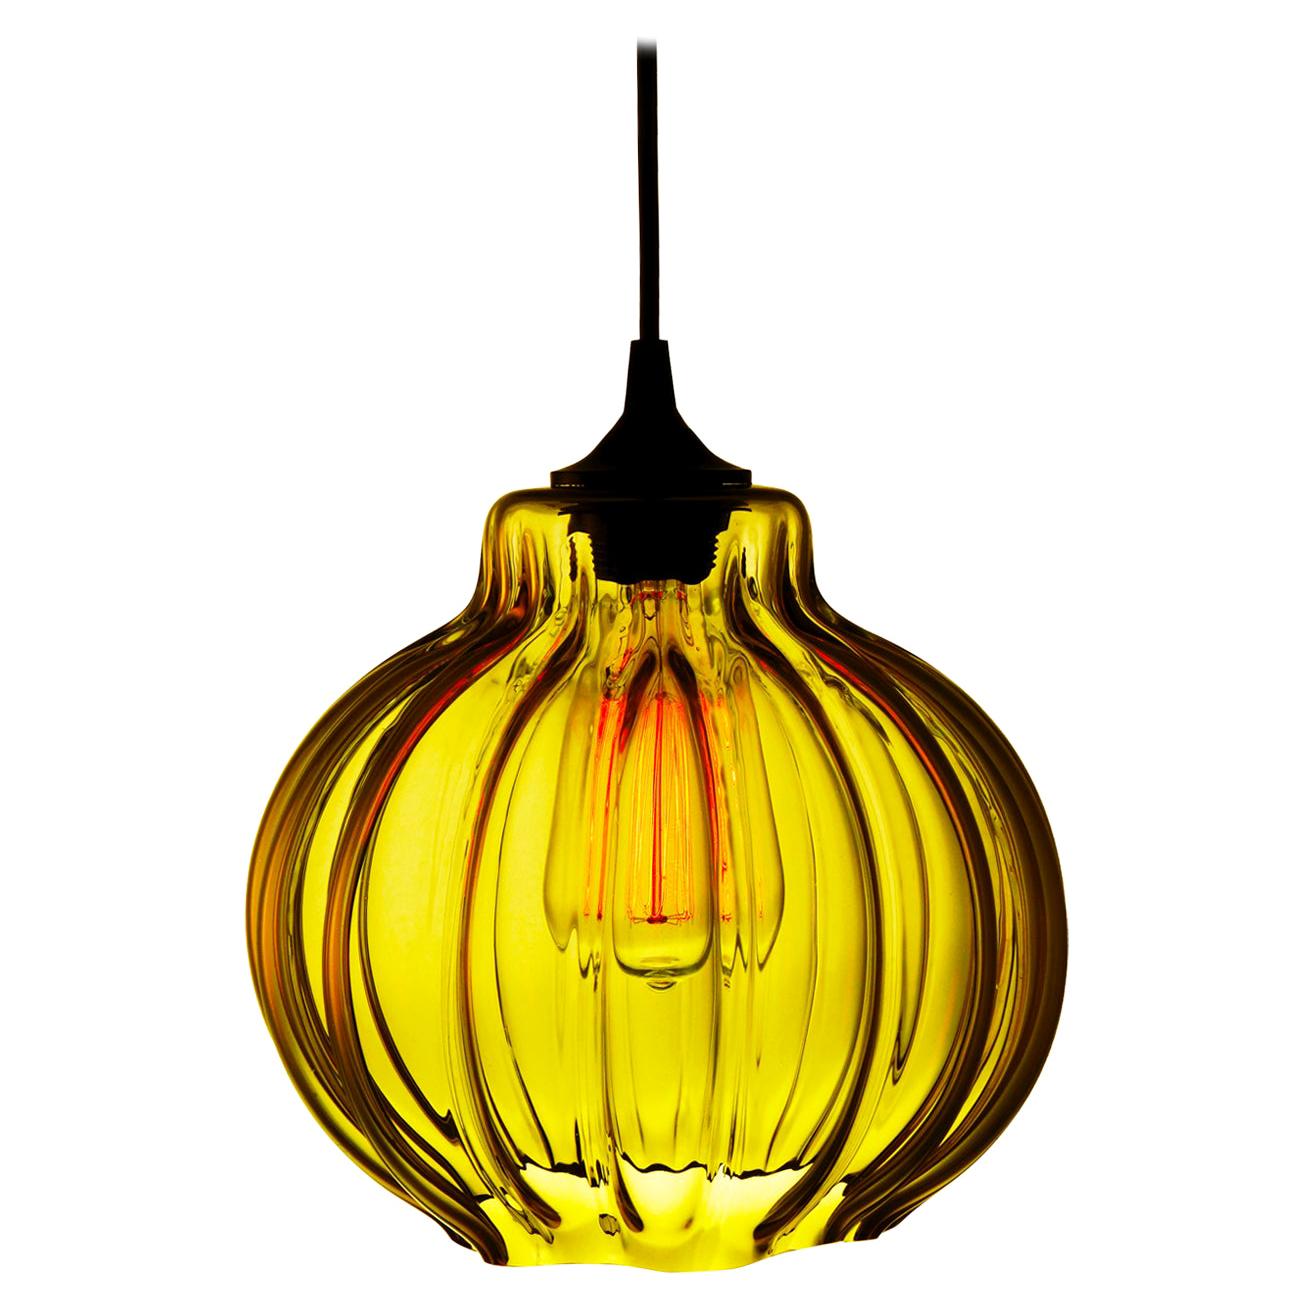 Tamala Contemporary Hand Blown Pendant Lamp in Golden Amber, Limited Series